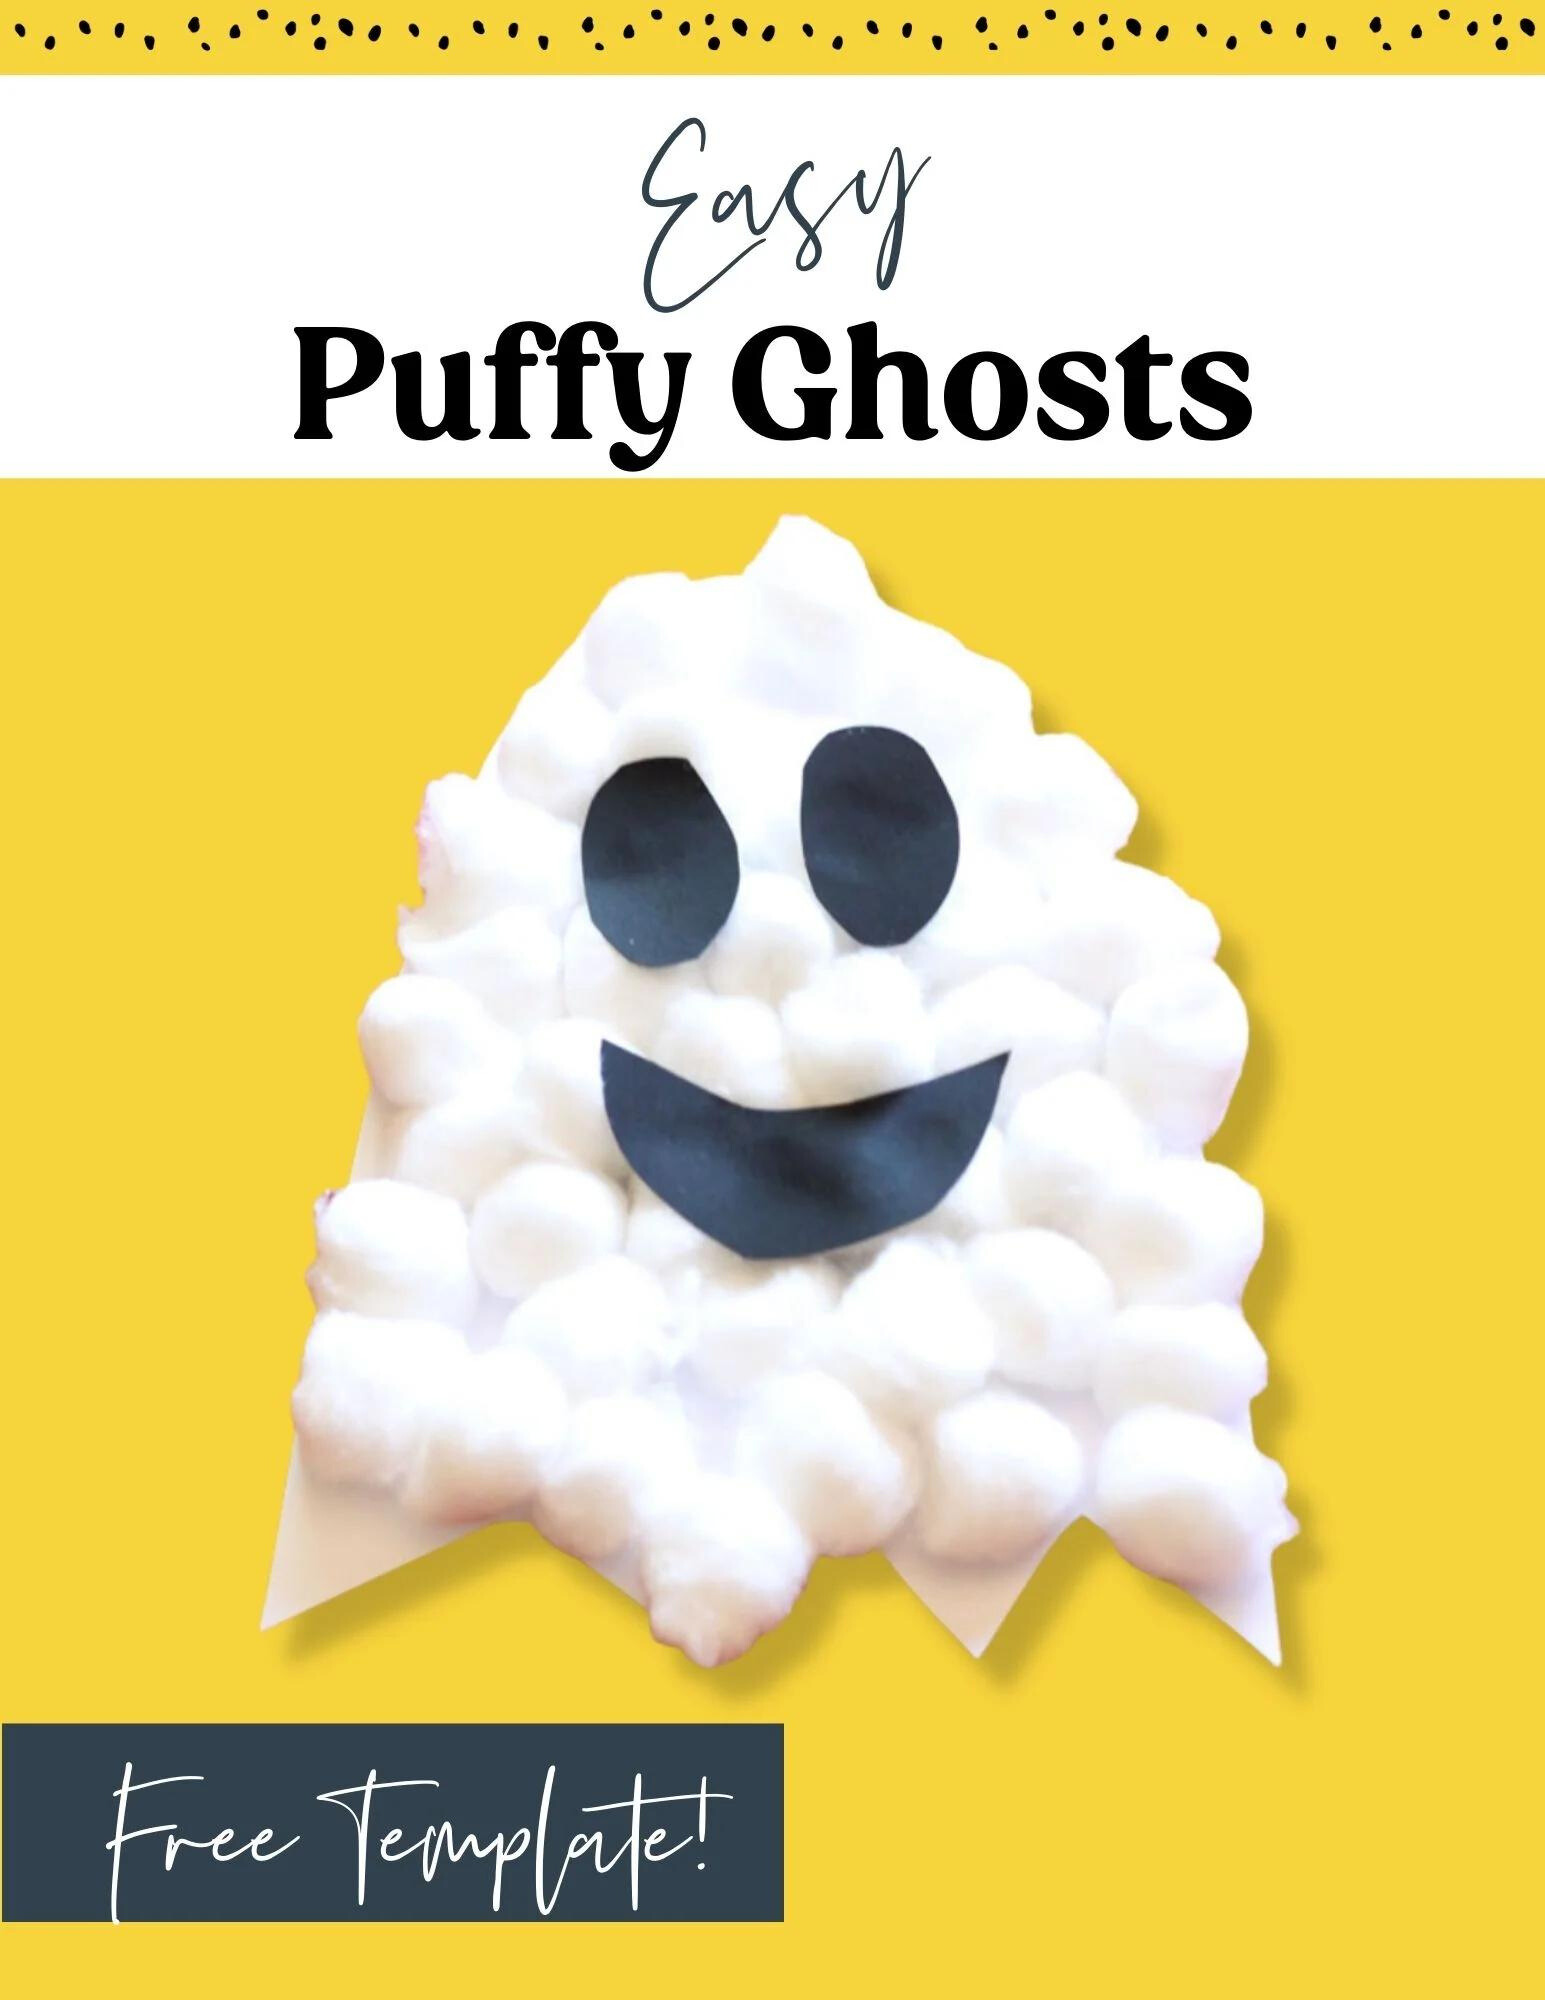 Puffy Ghosts